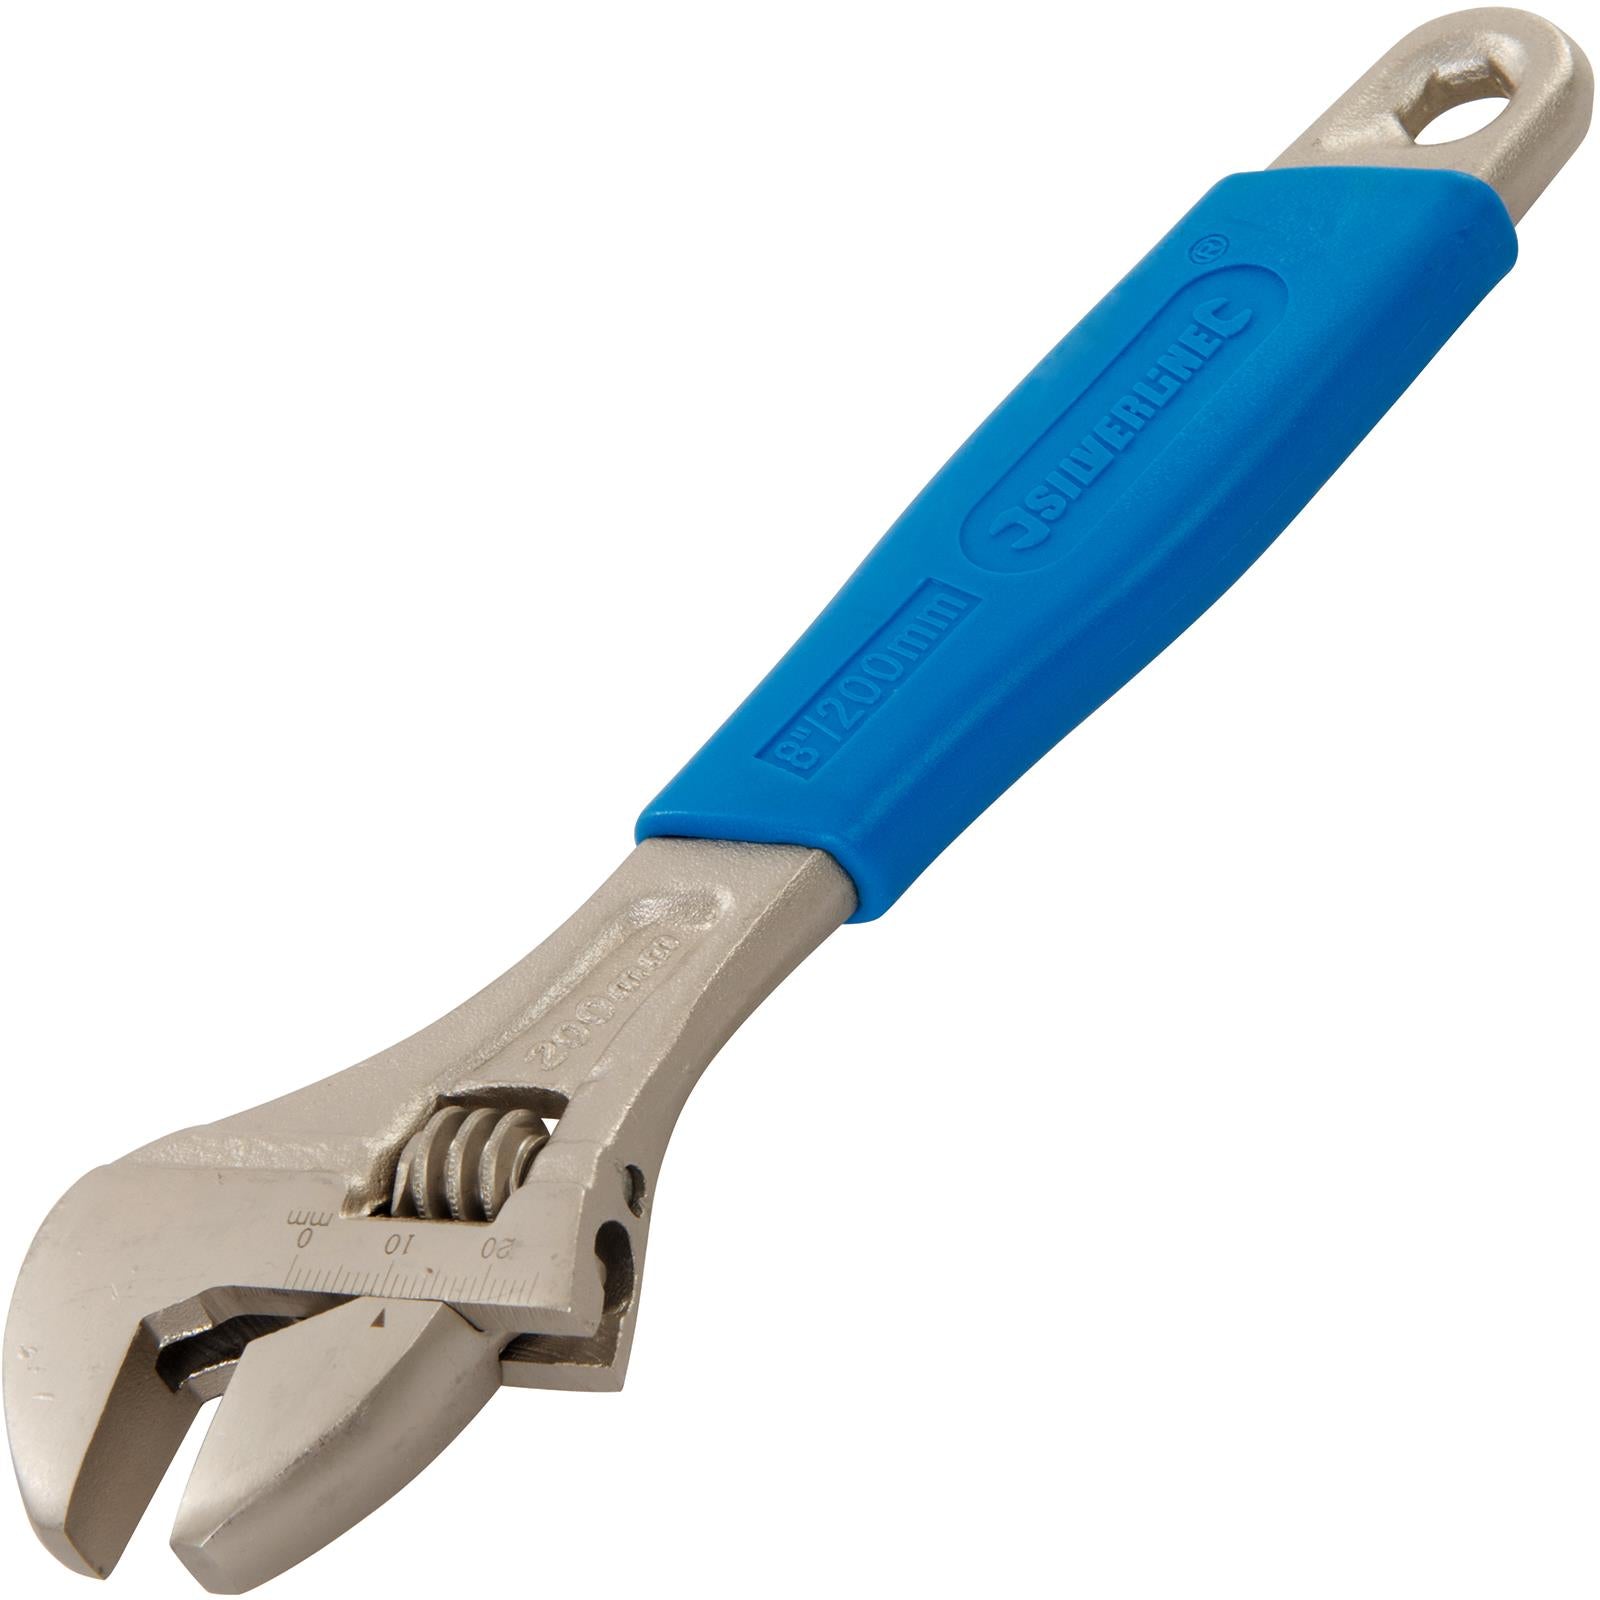 Silverline Soft Grip Adjustable Wrench 150, 200, 250 Or 300mm